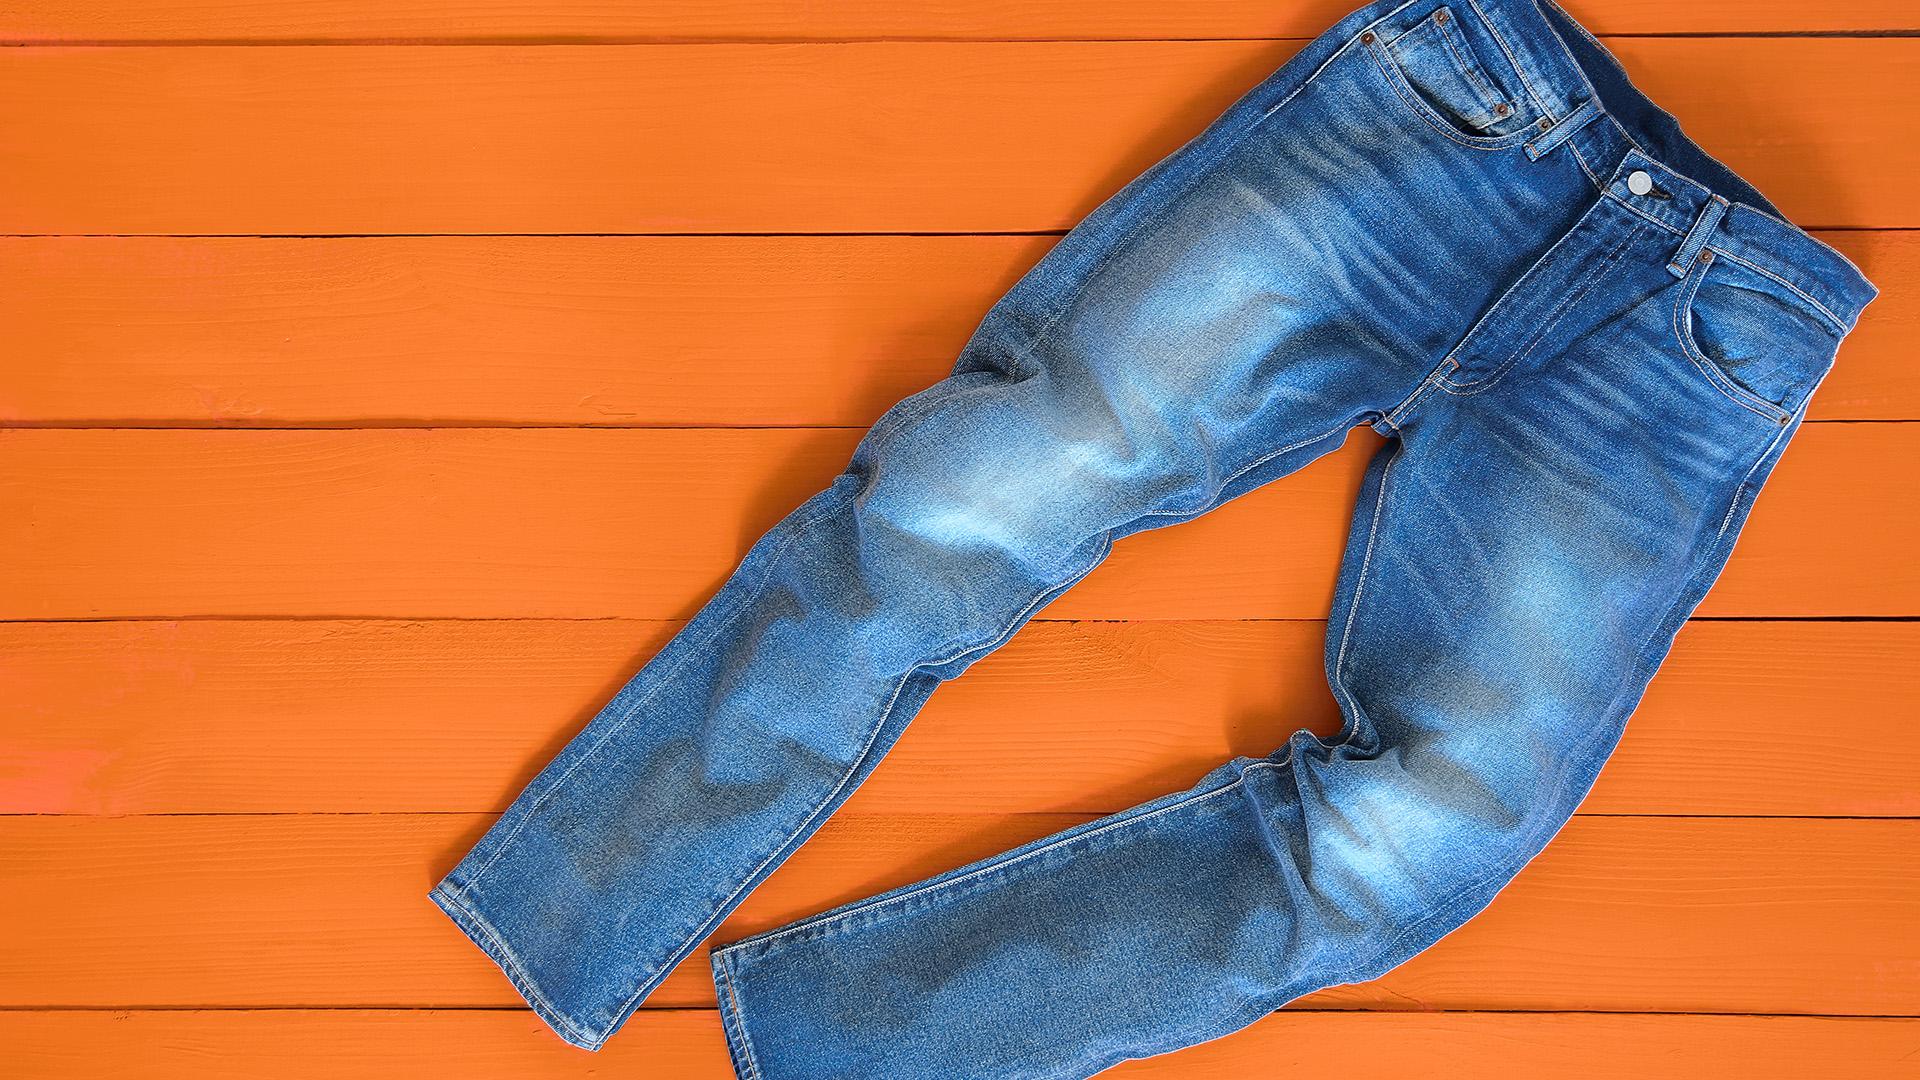 wash jeans without fading